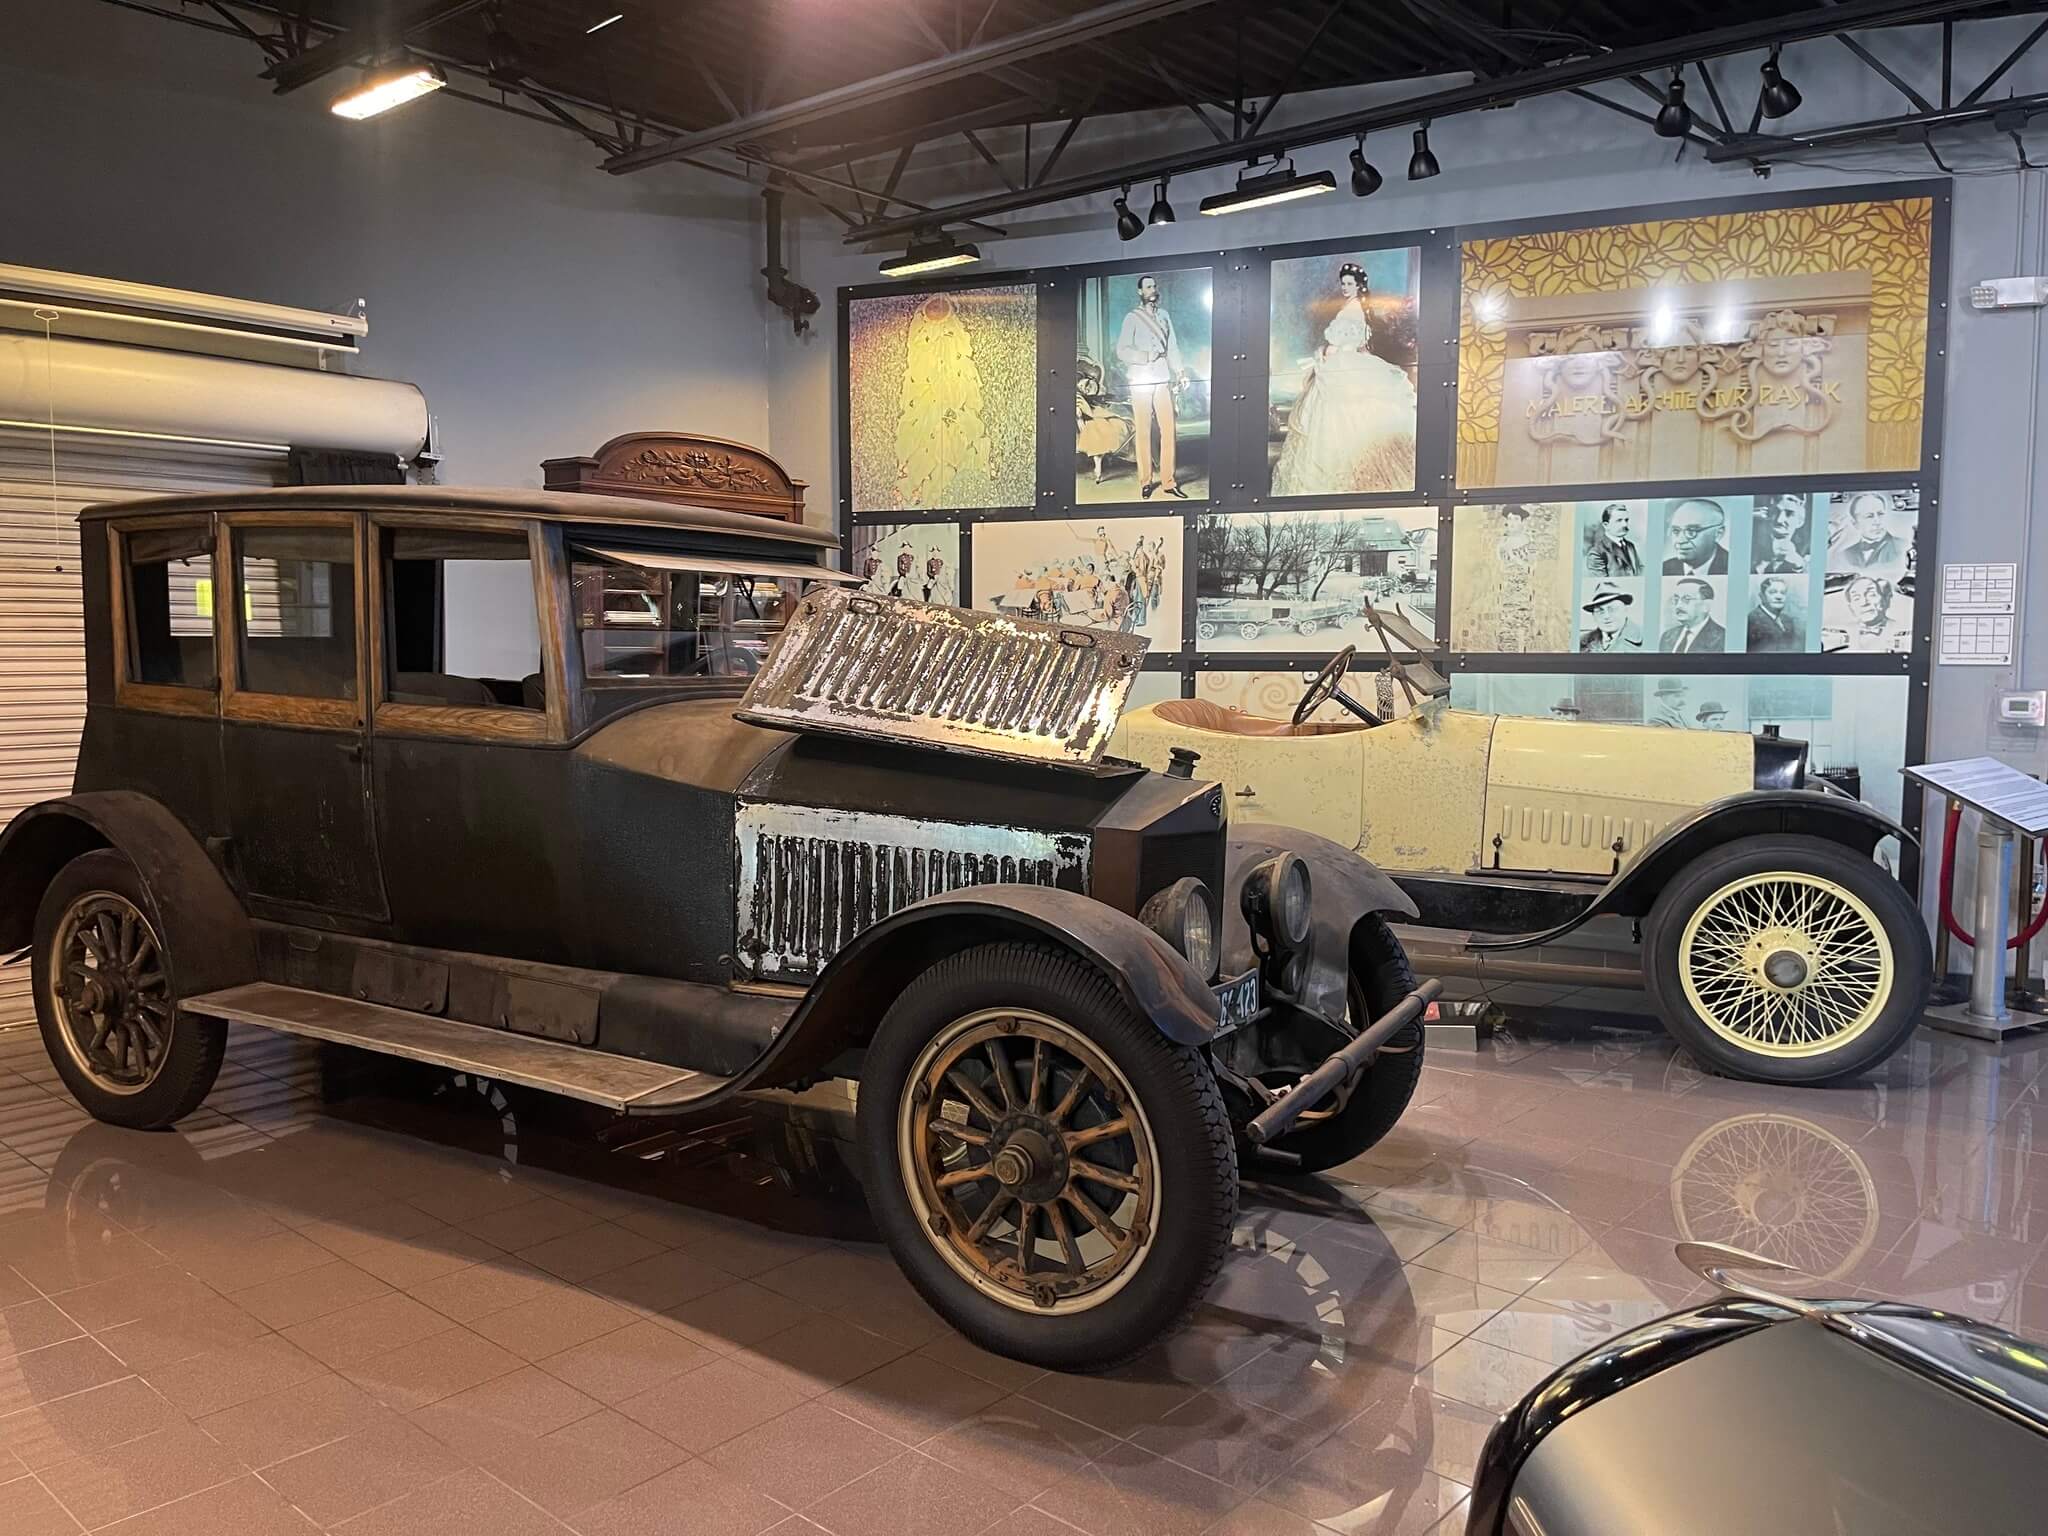 Old car at Tampa Bay Automobile Museum